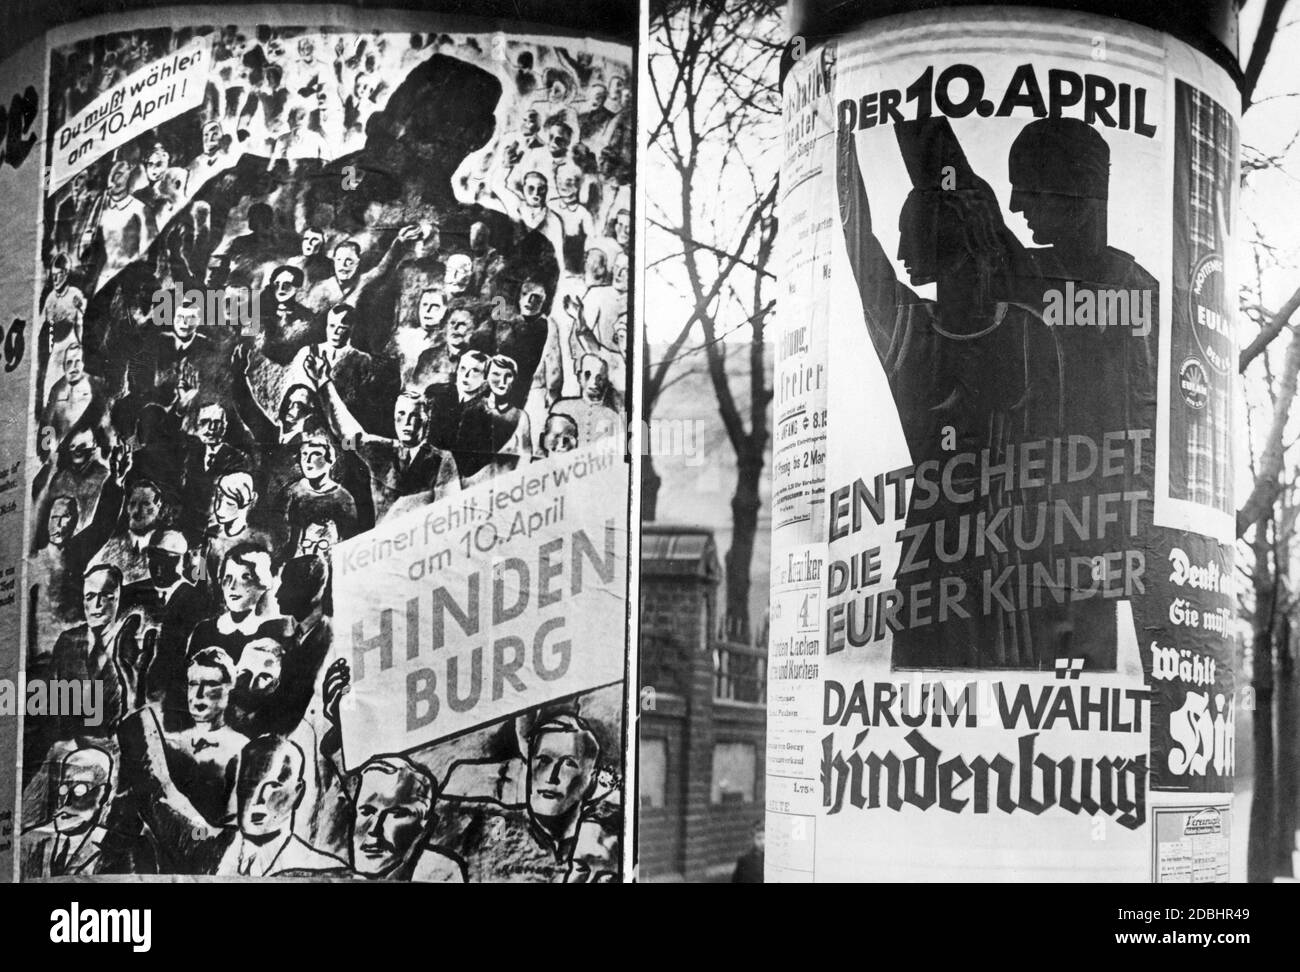 Election posters of the Hindenburg Committee with the call to elect Hindenburg as President of the Reich on April 10. Stock Photo